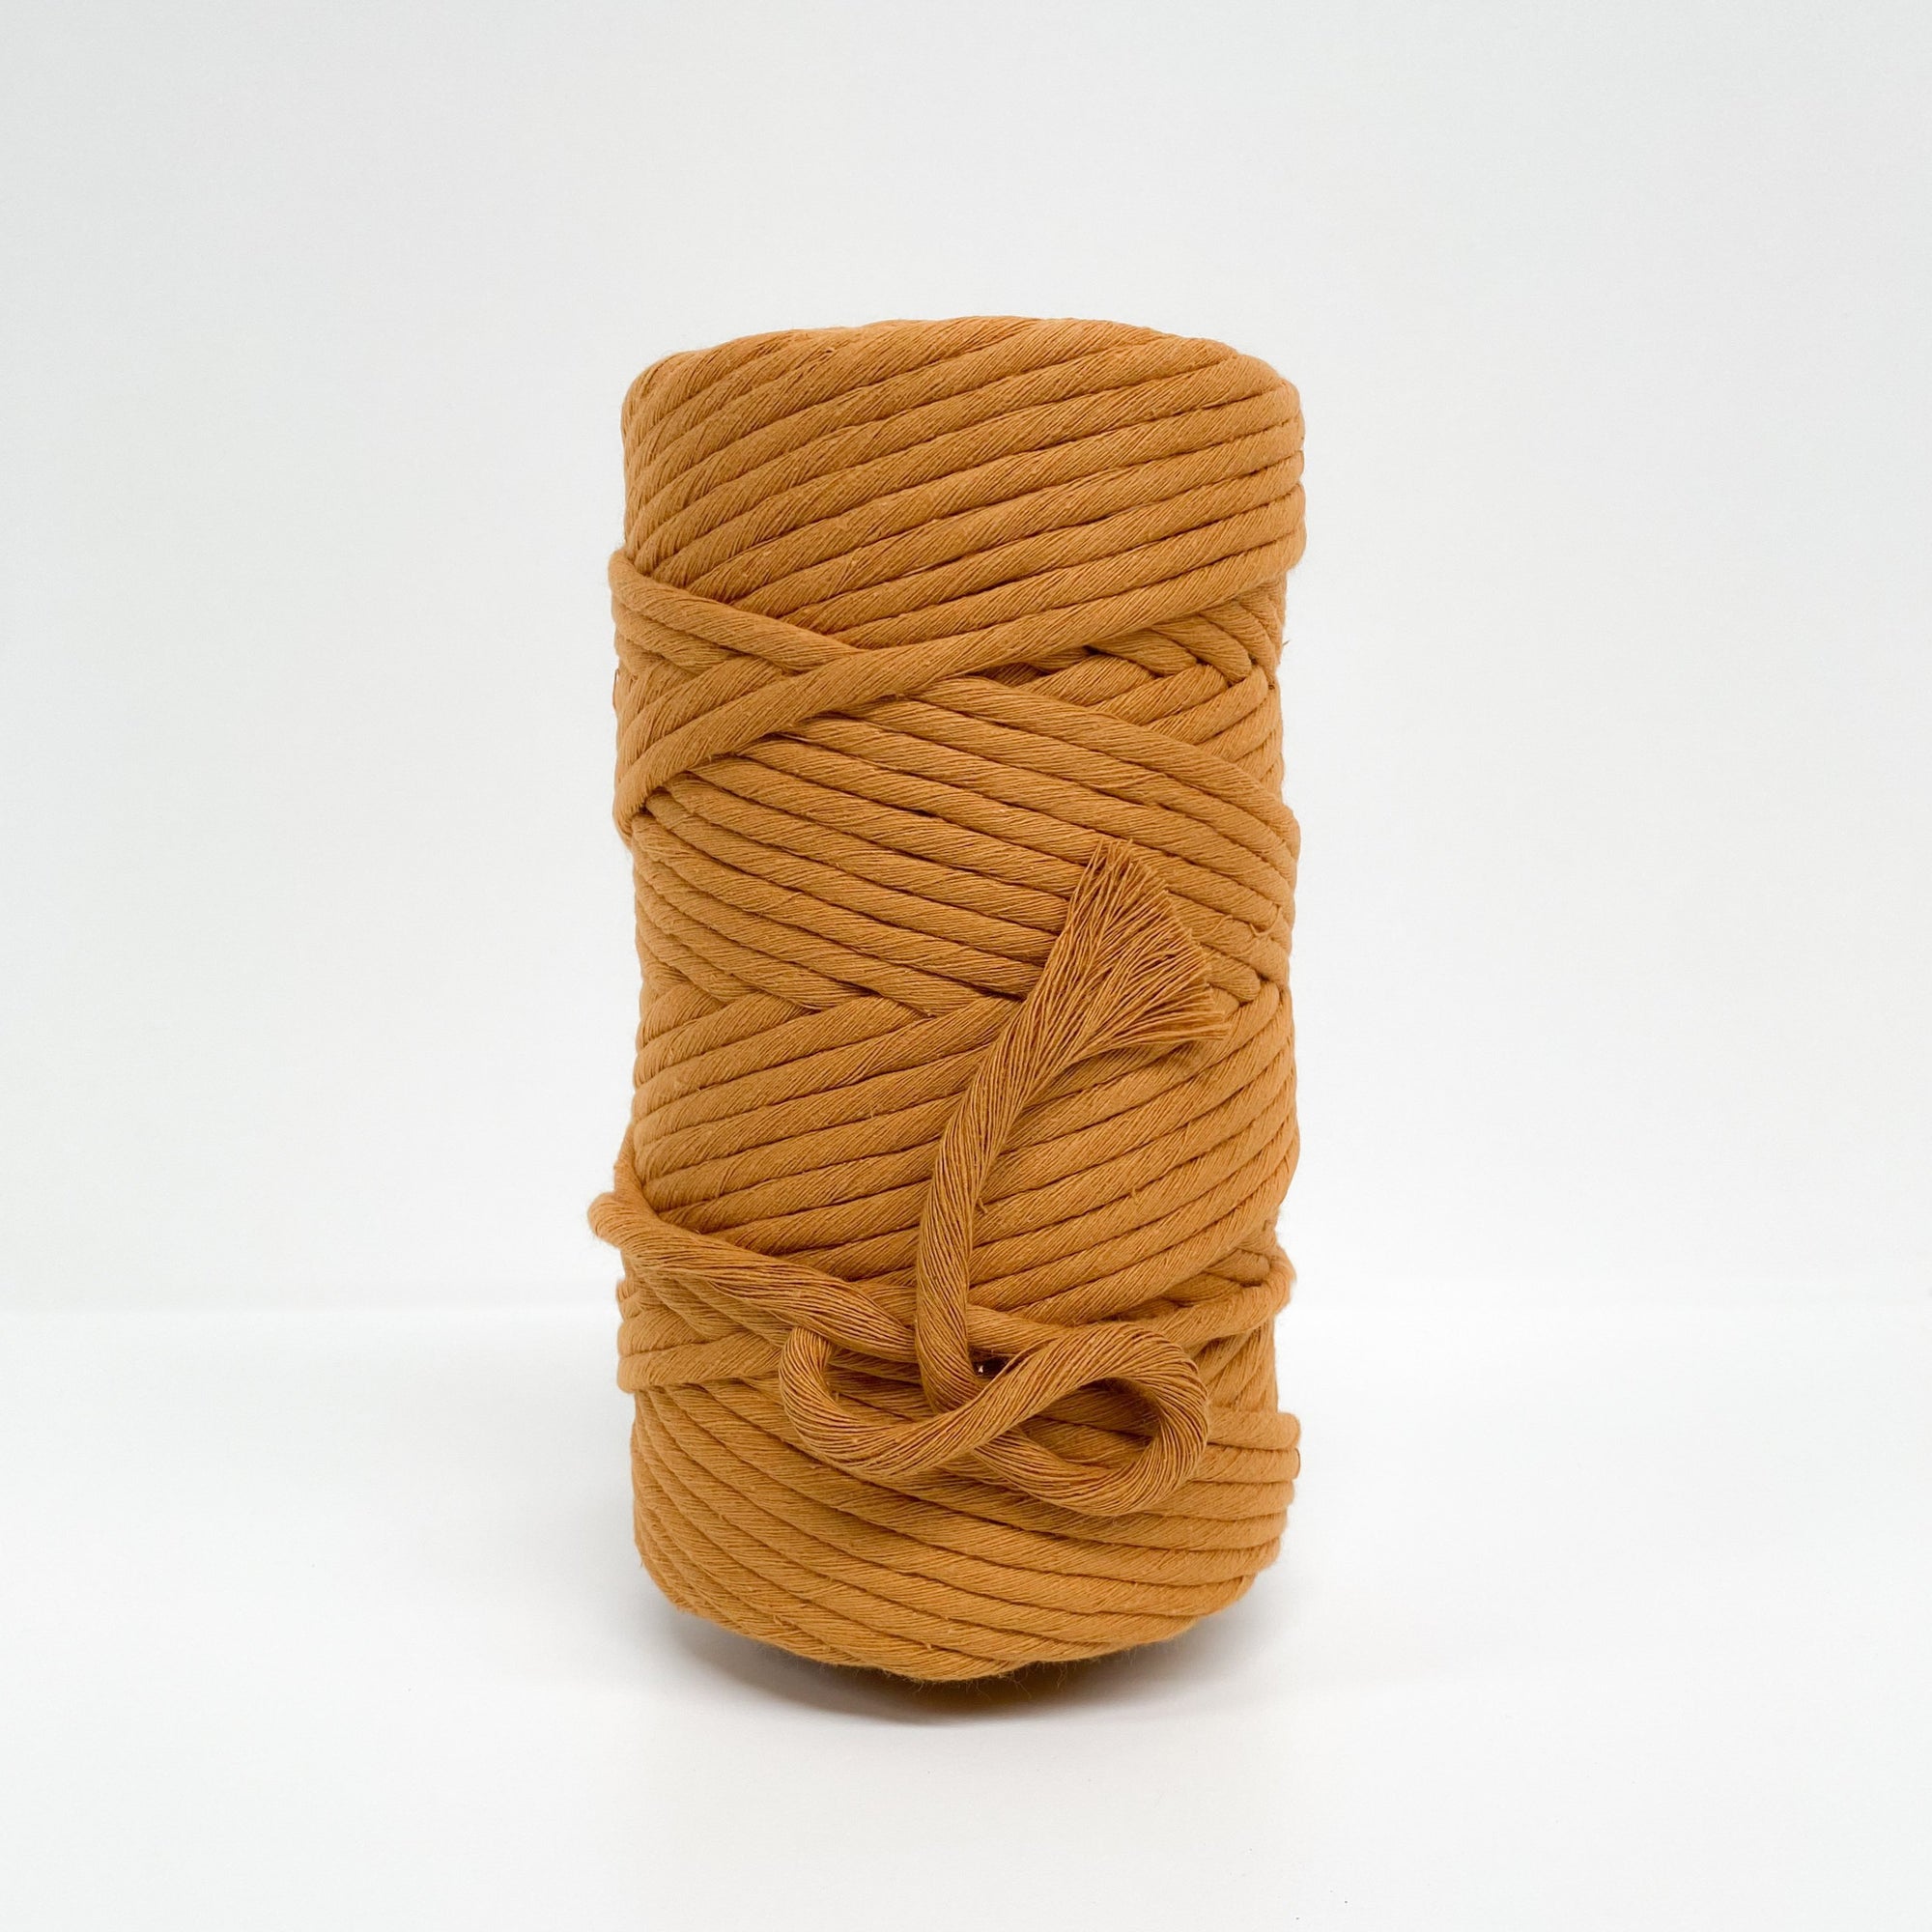 Mary Maker Studio Luxe Colour Cotton 8mm 1KG 8mm Recycled Luxe Macrame String // Mustard macrame cotton macrame rope macrame workshop macrame patterns macrame